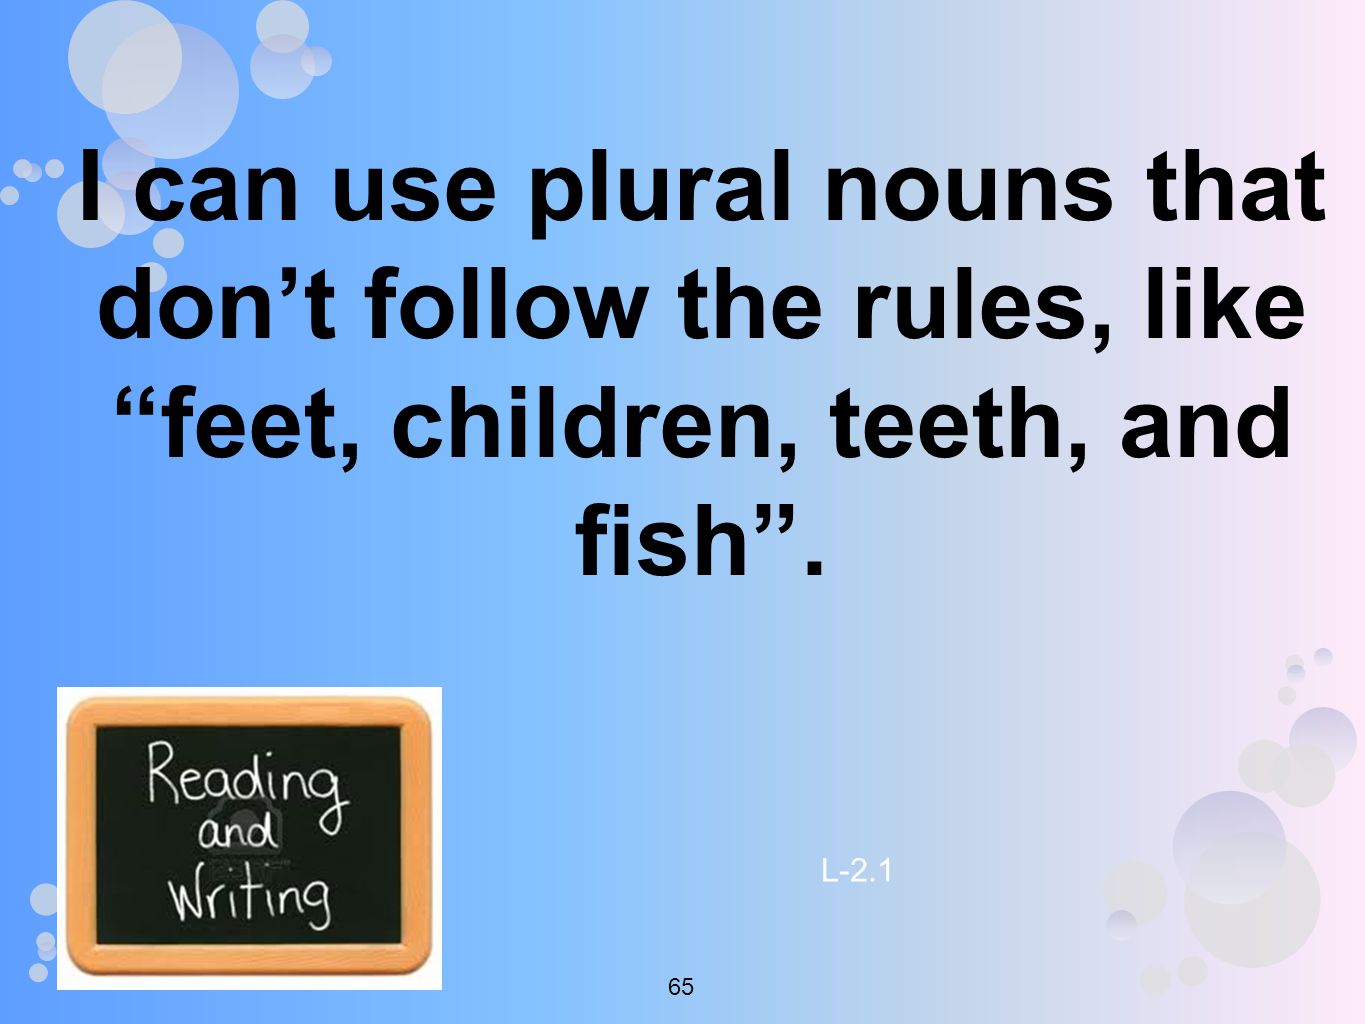 I can use plural nouns that don’t follow the rules, like feet, children, teeth, and fish .